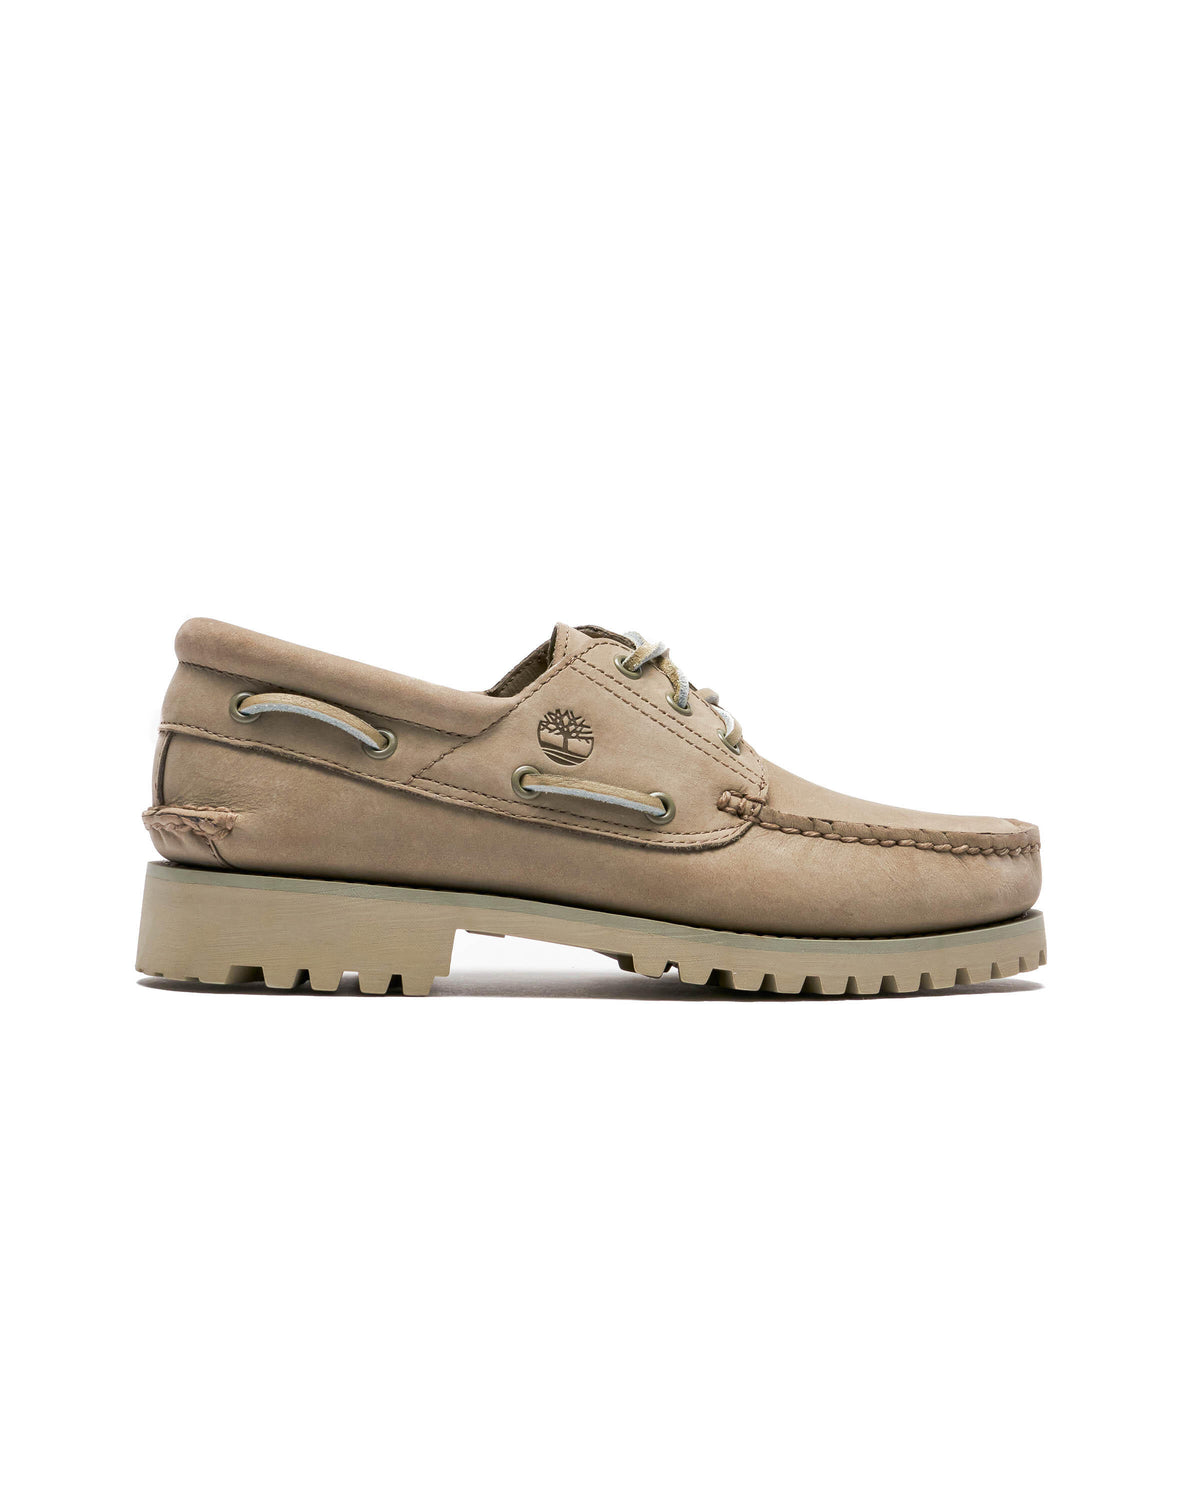 Timberland Authentic BOAT SHOE